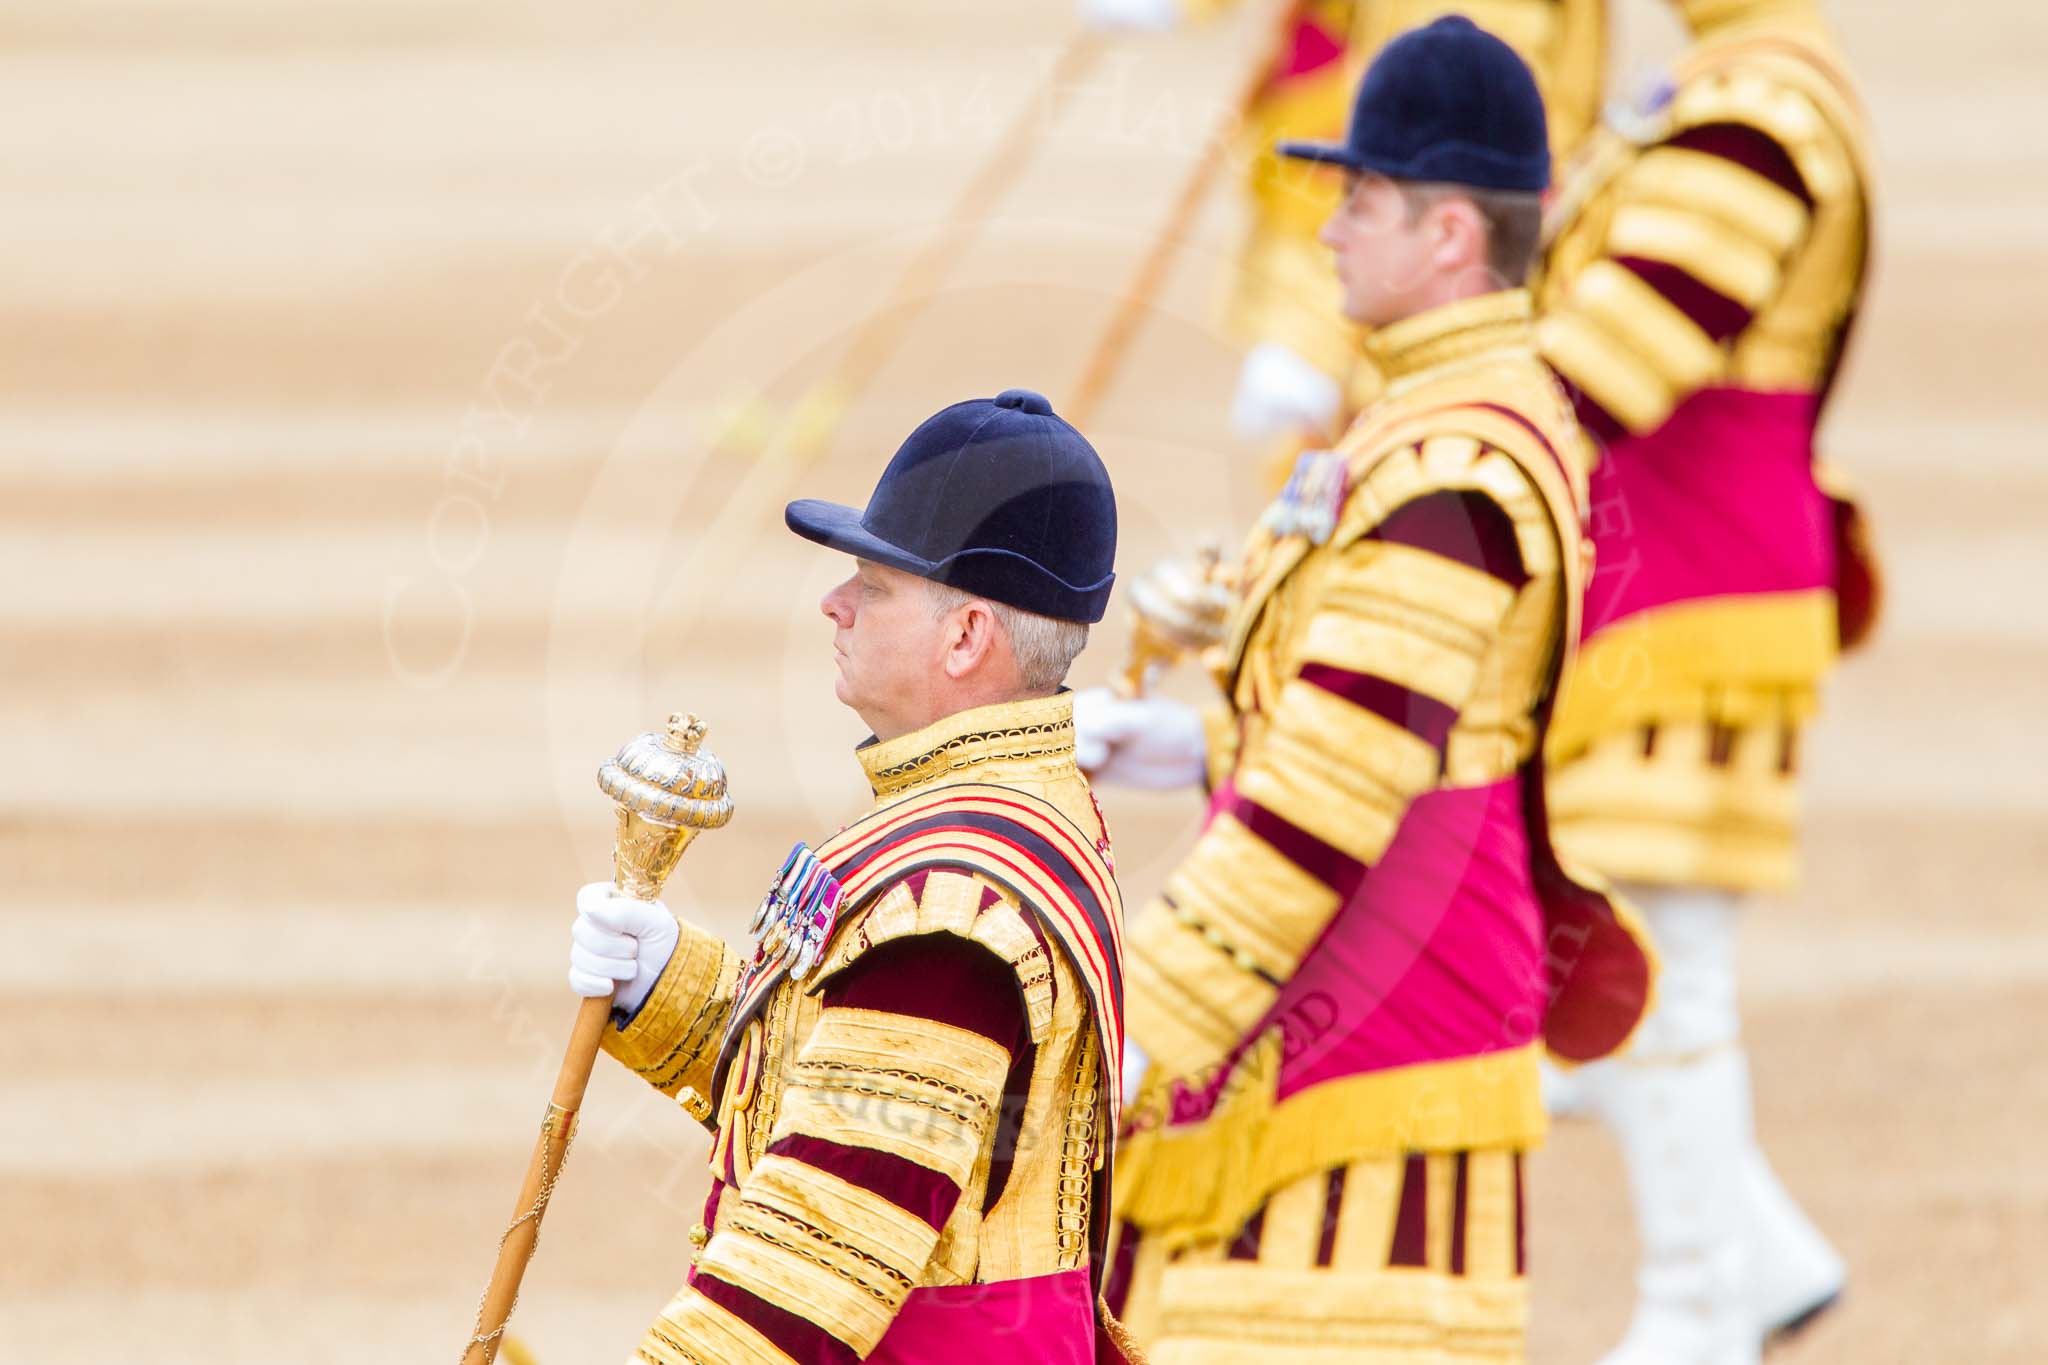 Trooping the Colour 2014.
Horse Guards Parade, Westminster,
London SW1A,

United Kingdom,
on 14 June 2014 at 11:13, image #468